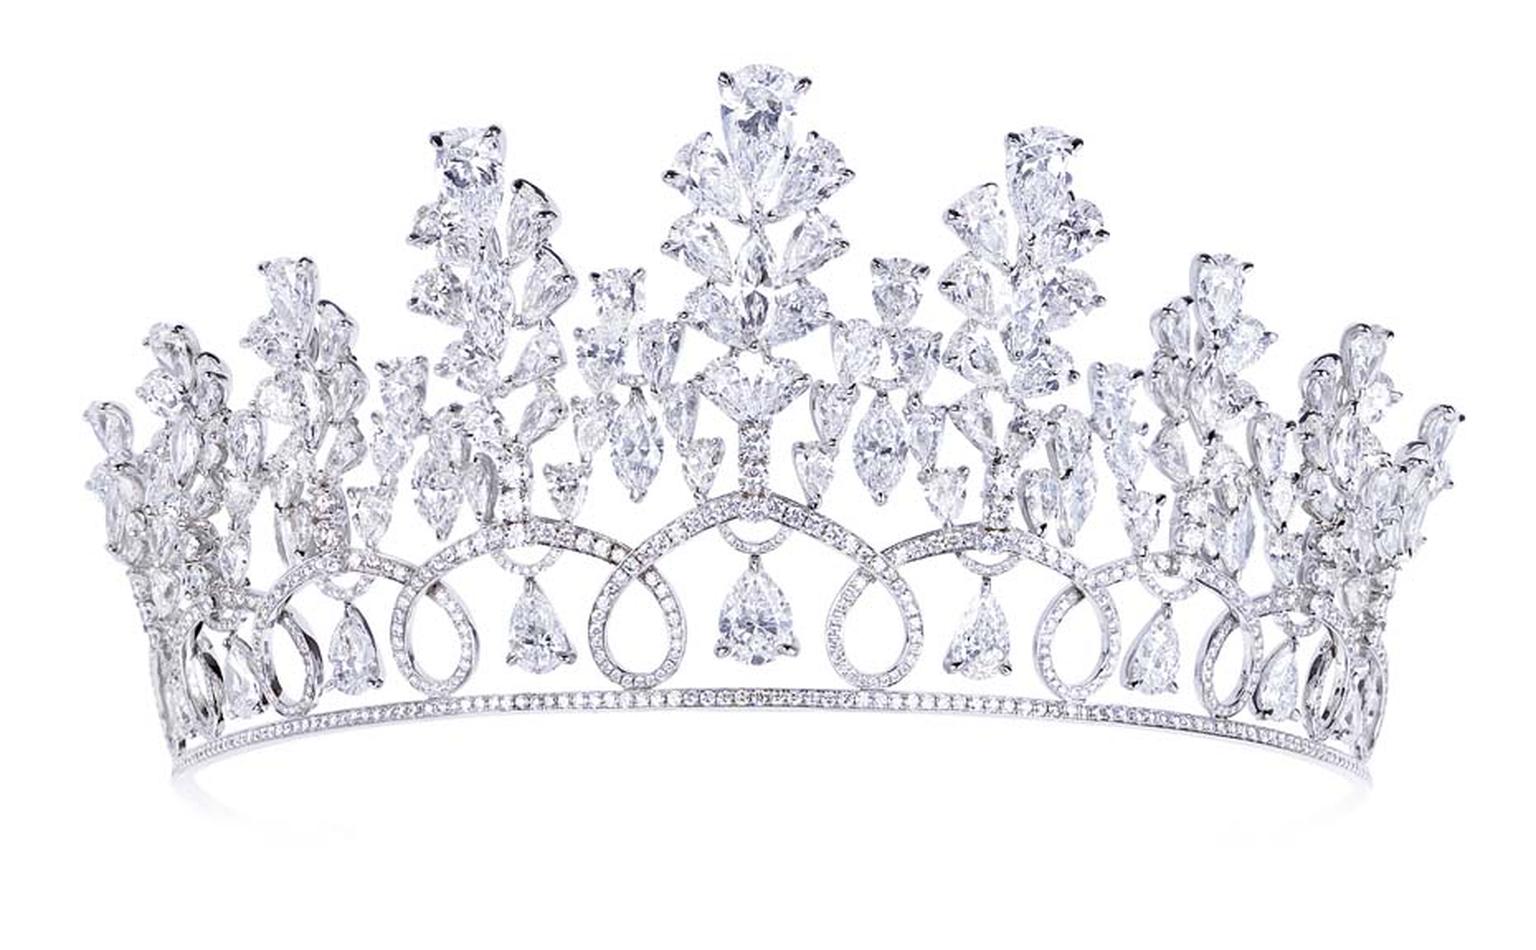 White gold tiara with 88.40ct of white fancy cut diamonds by Moussaieff.